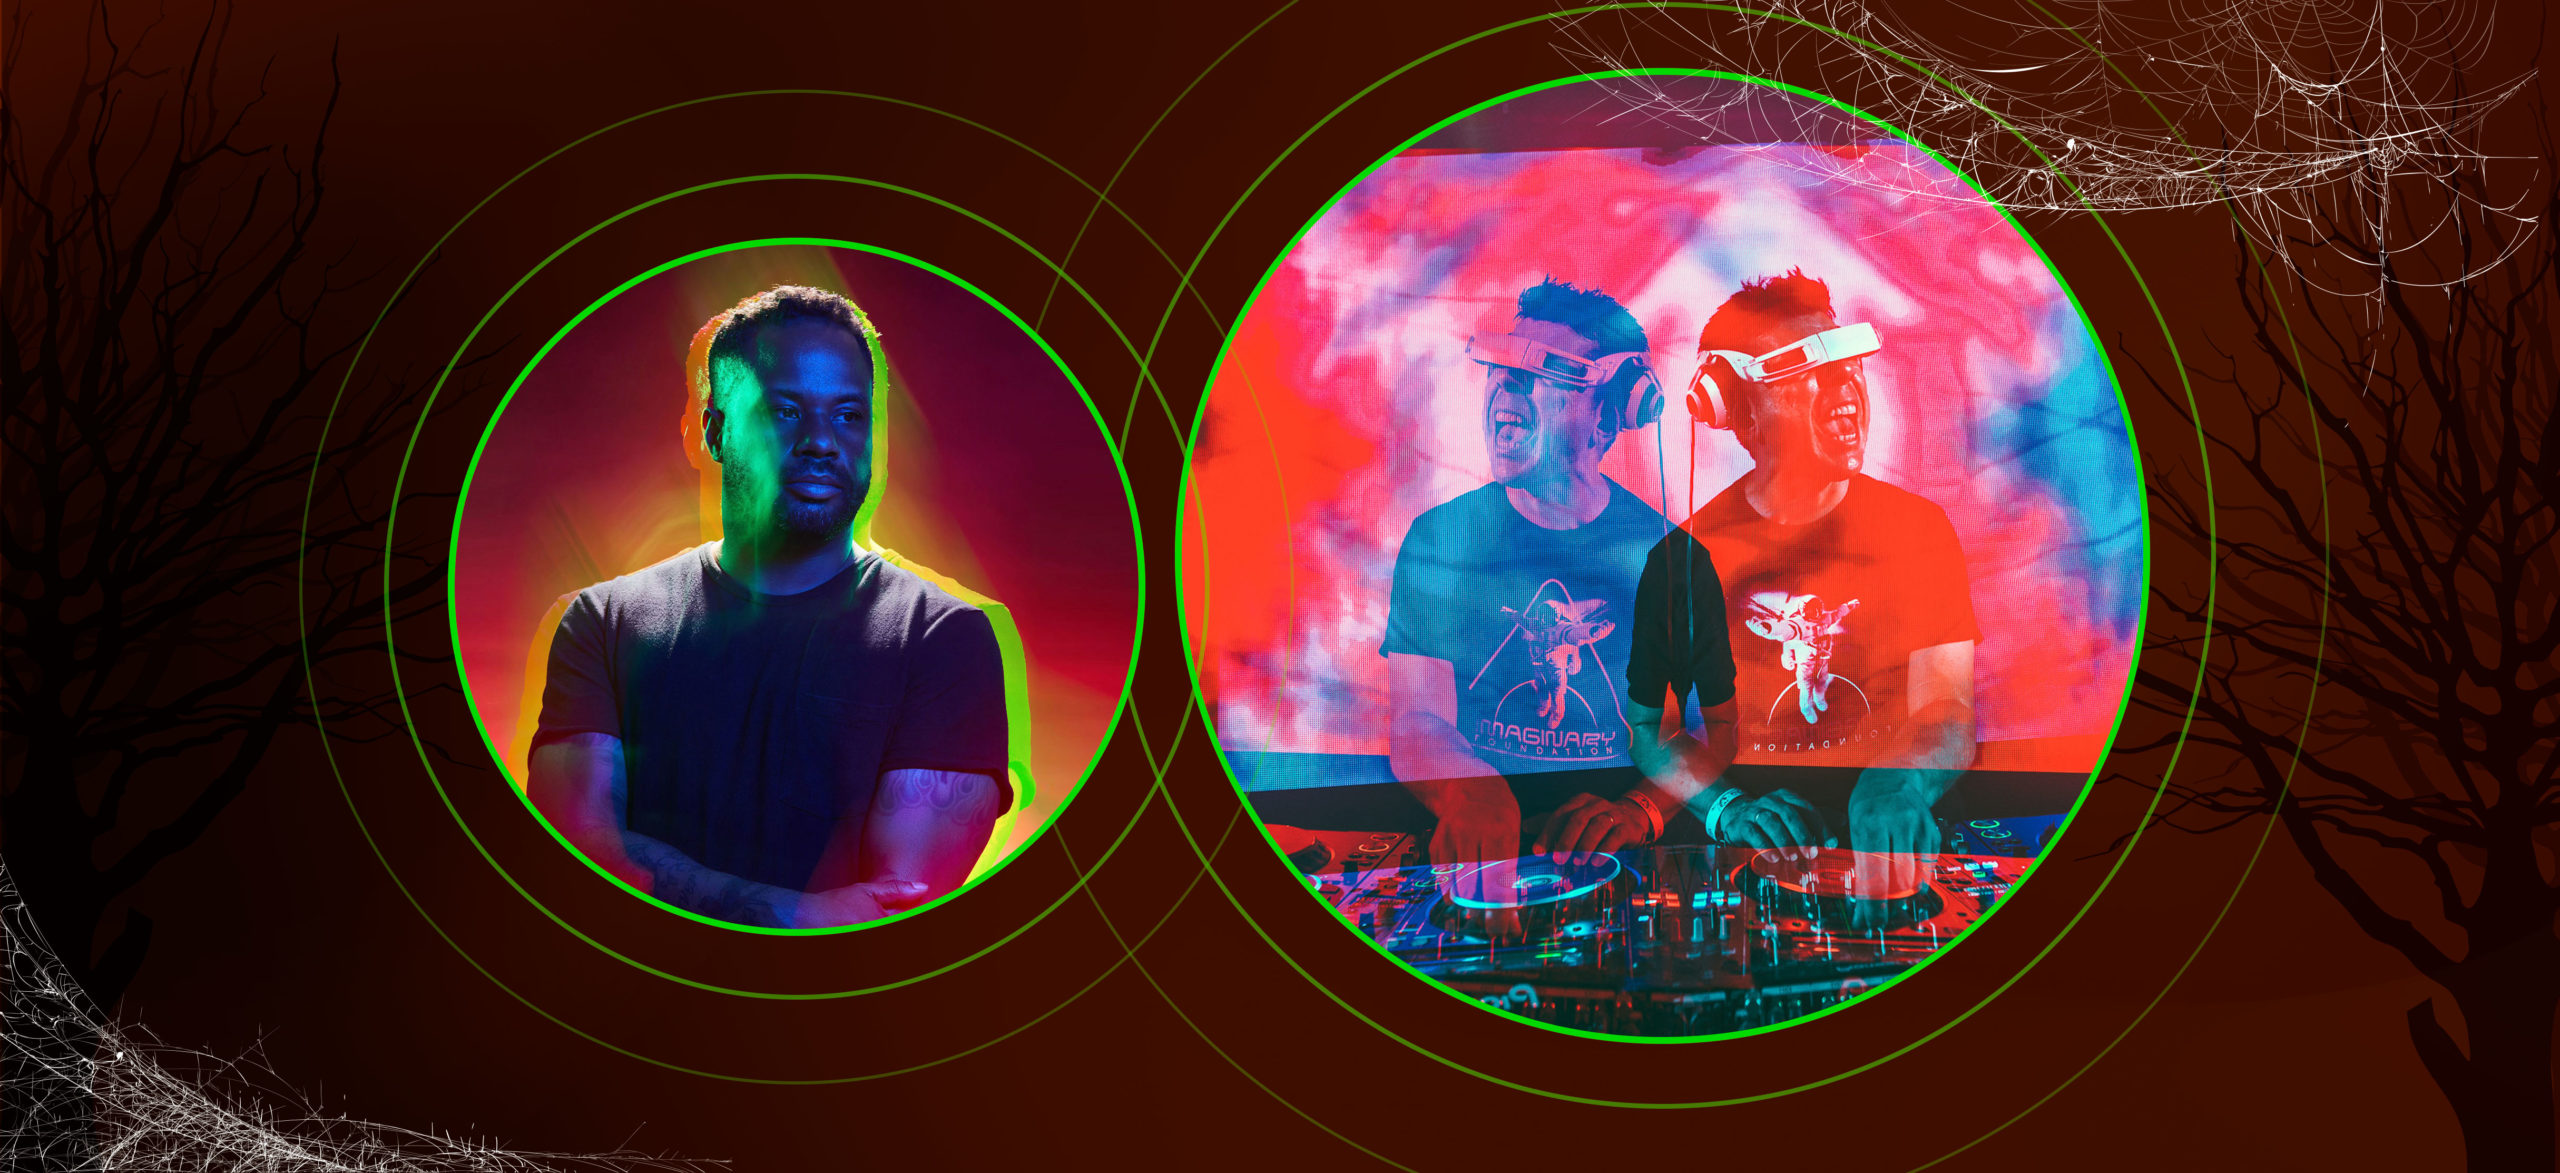 Background image for DJs in the Globe: The Crystal Method & Red Eye 